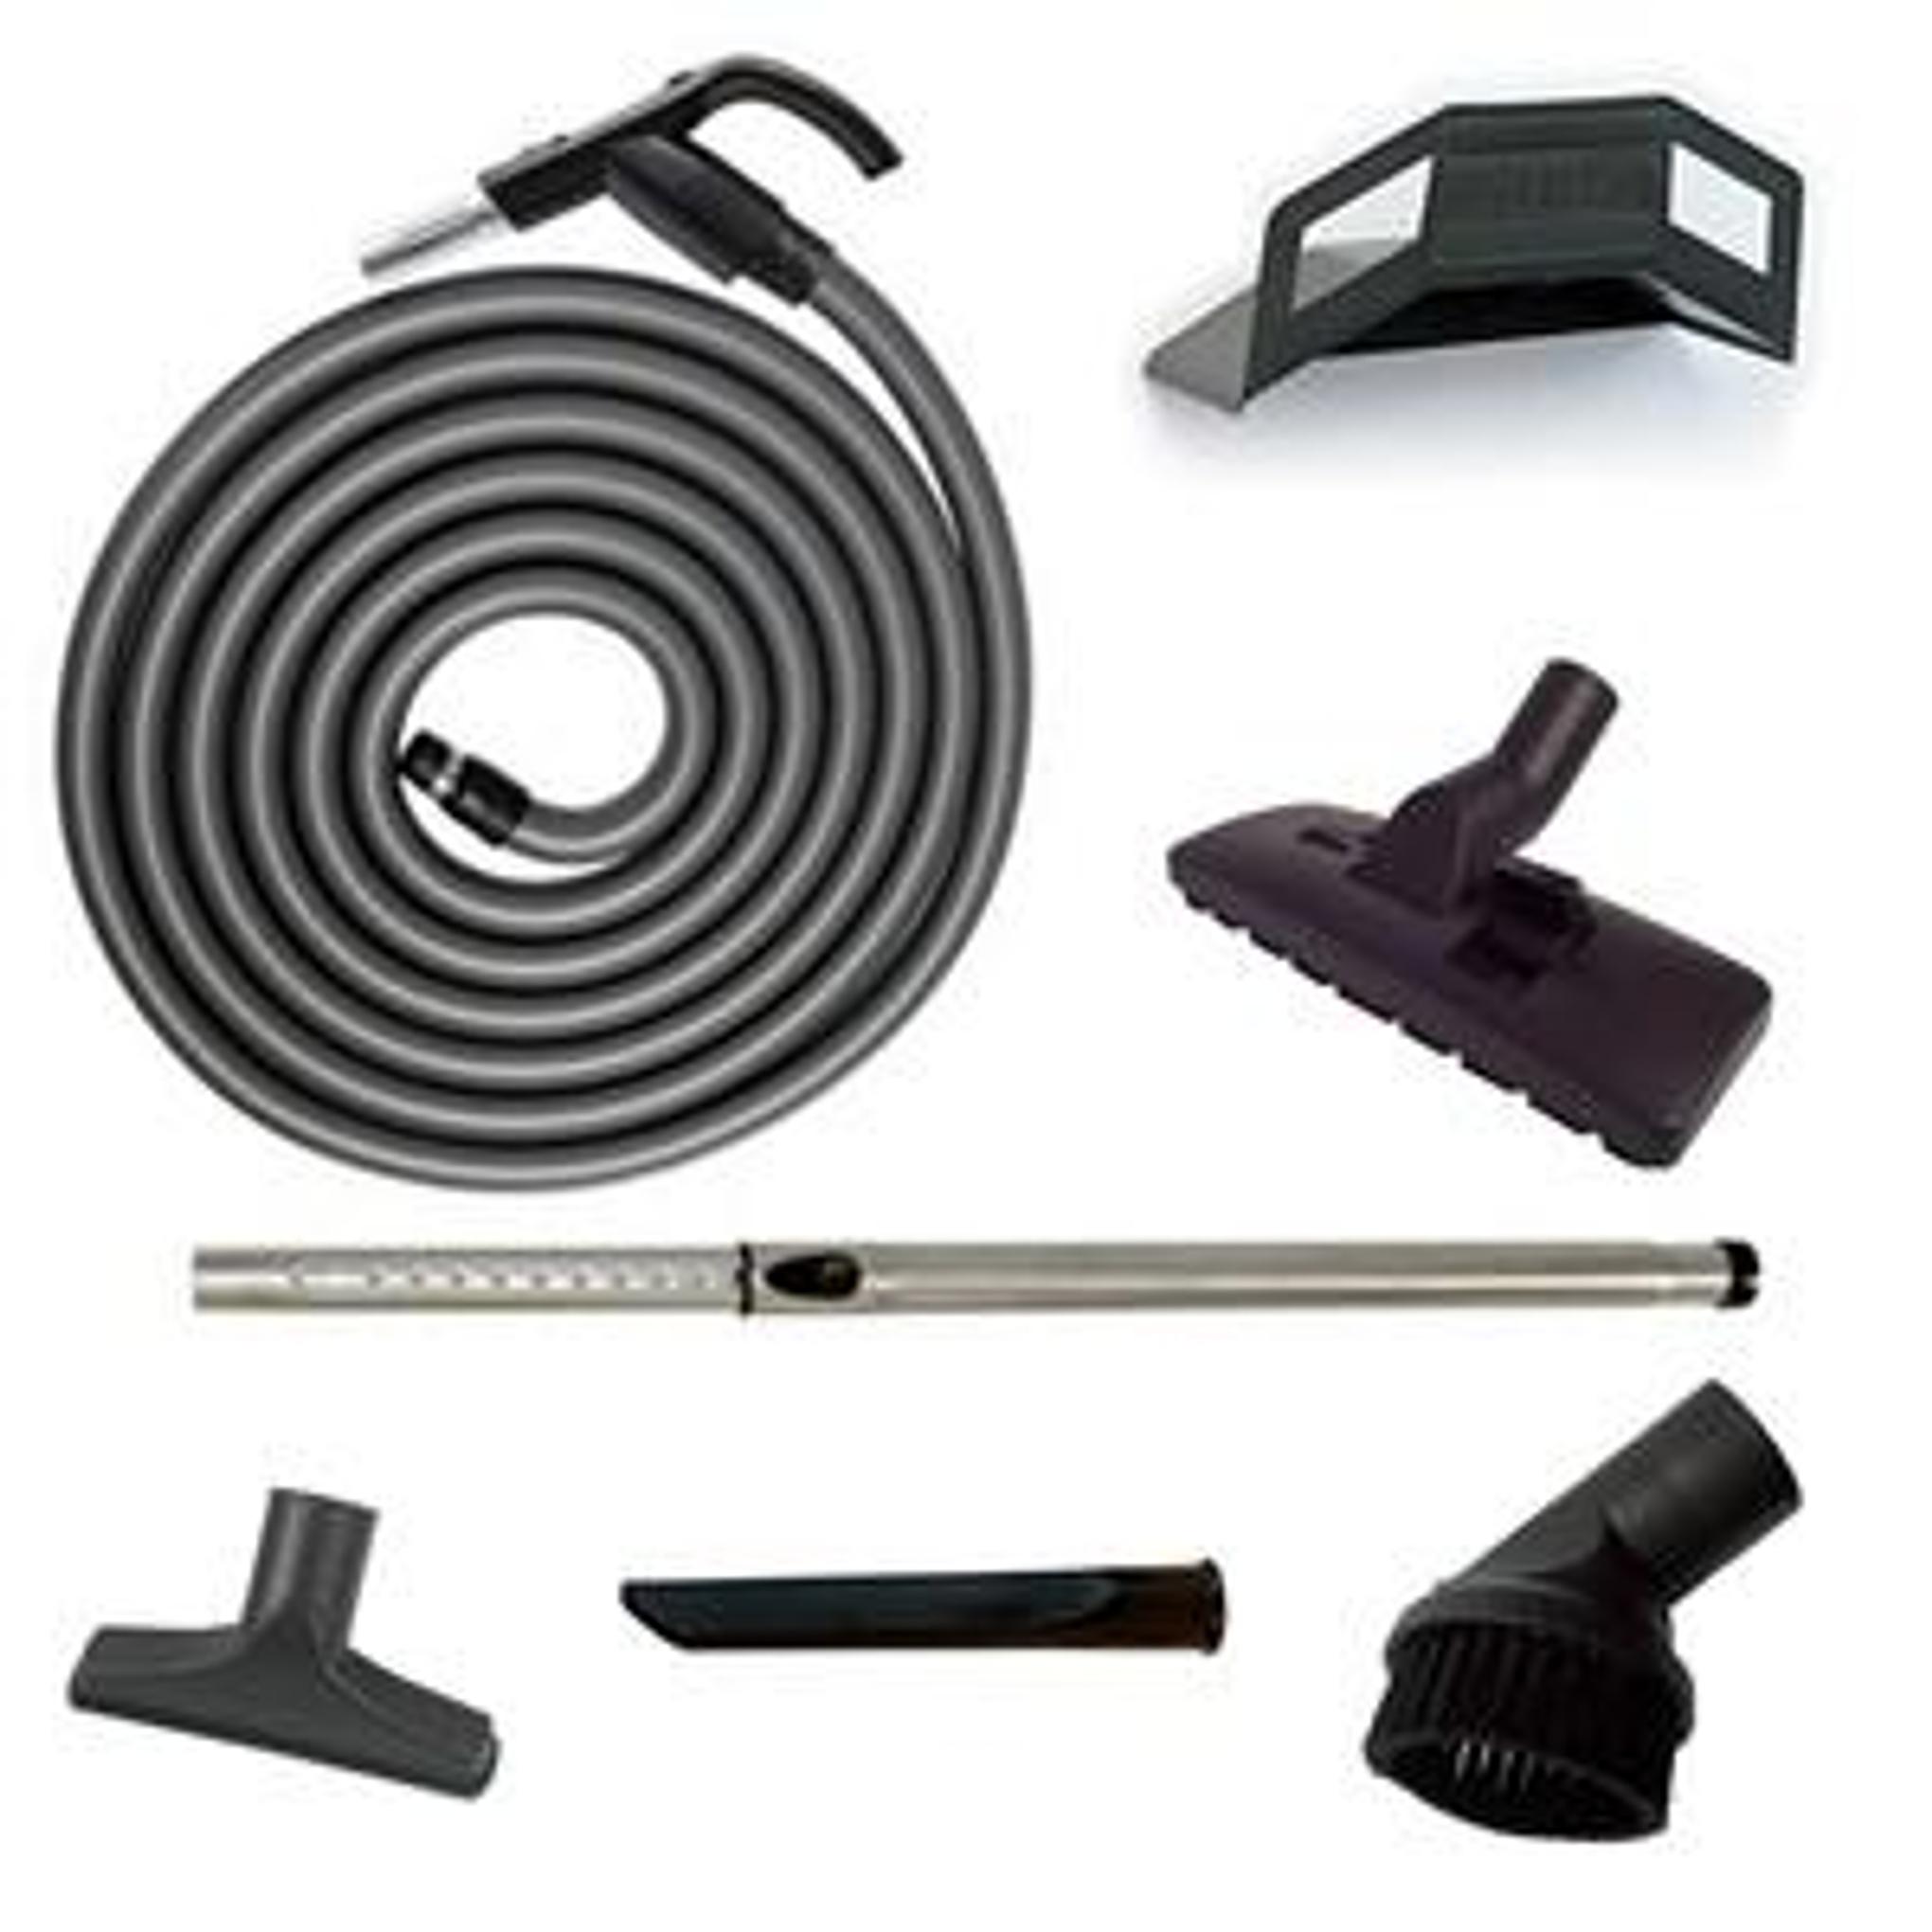 DAS Ducted Vacuum Cleaner SWITCH HOSE & TOOL KIT 9M 